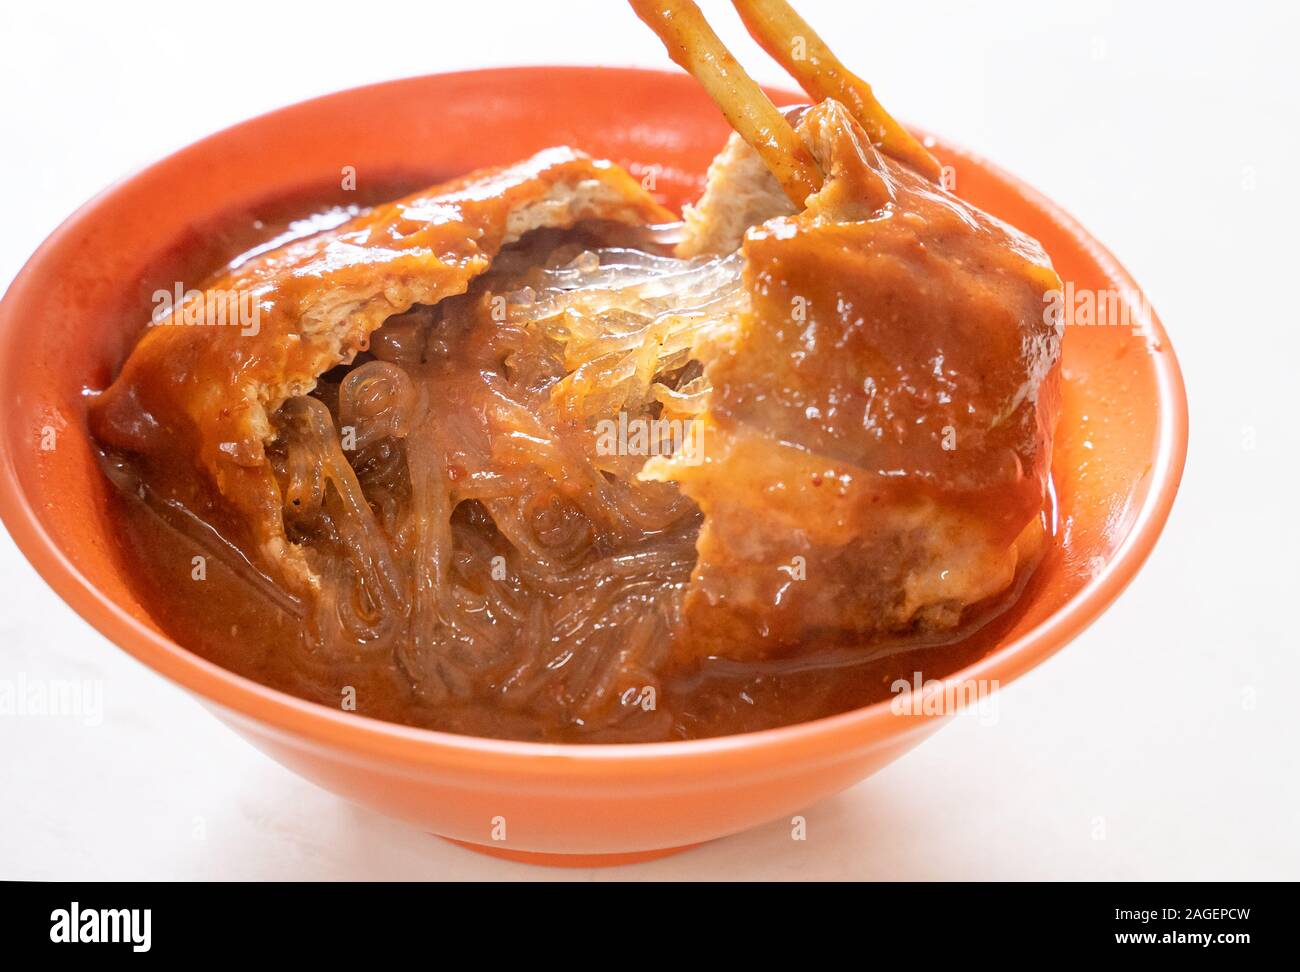 Tamsui agei (age, aburaage), delicious famous street food in Taipei, Taiwan, stuffed with mung bean noodles and chili sauce topping, lifestyle, close Stock Photo